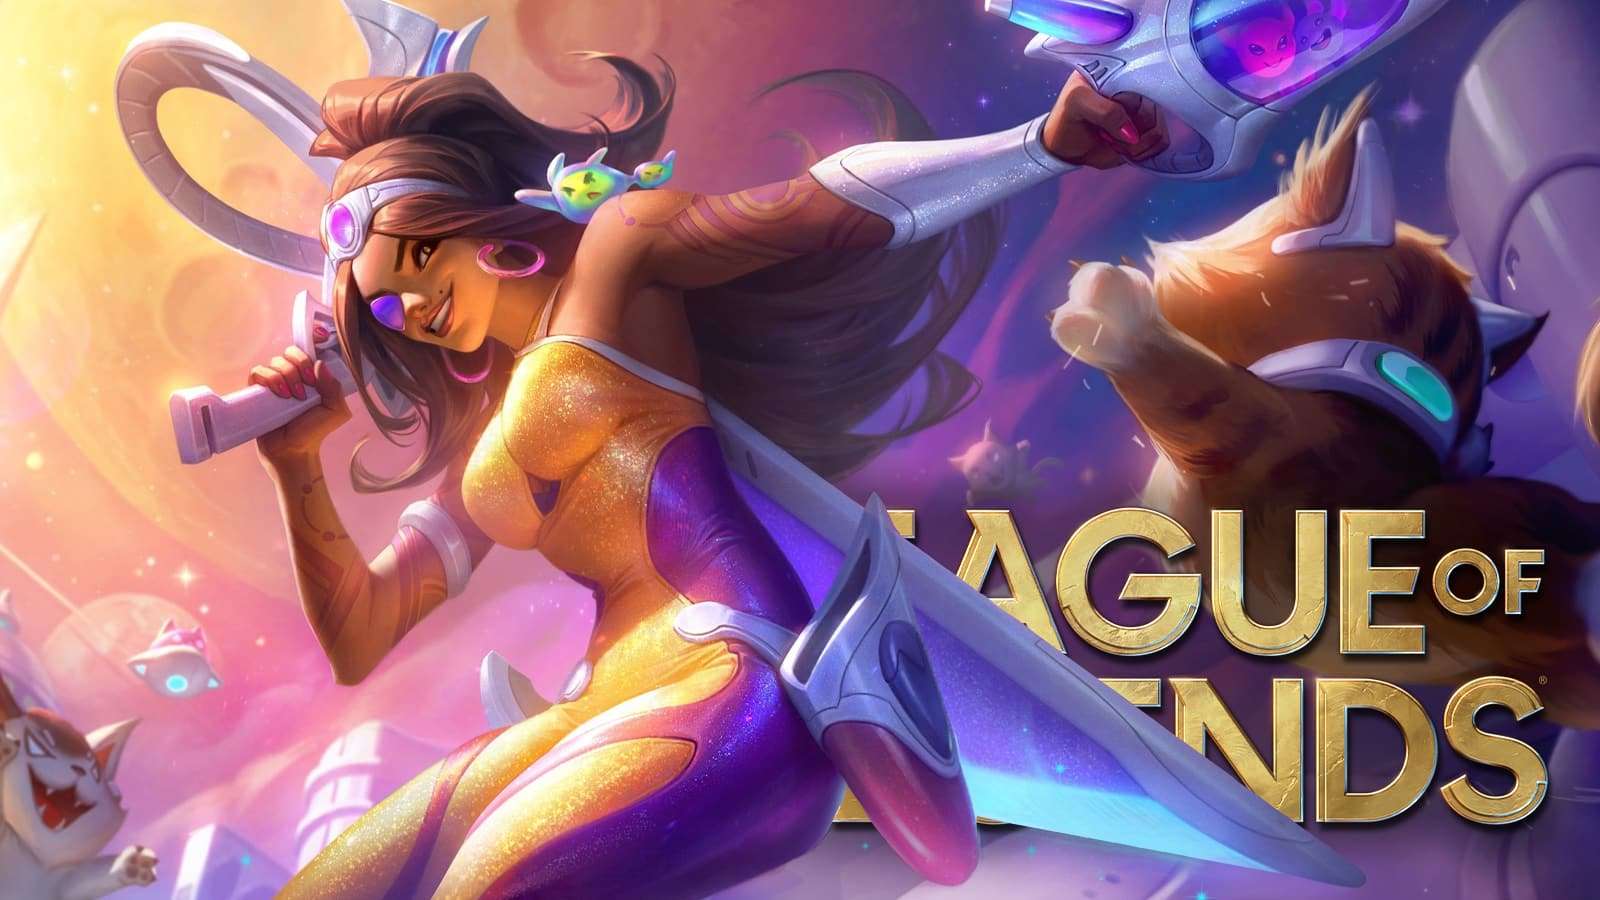 Space Groove Samira in League of Legends